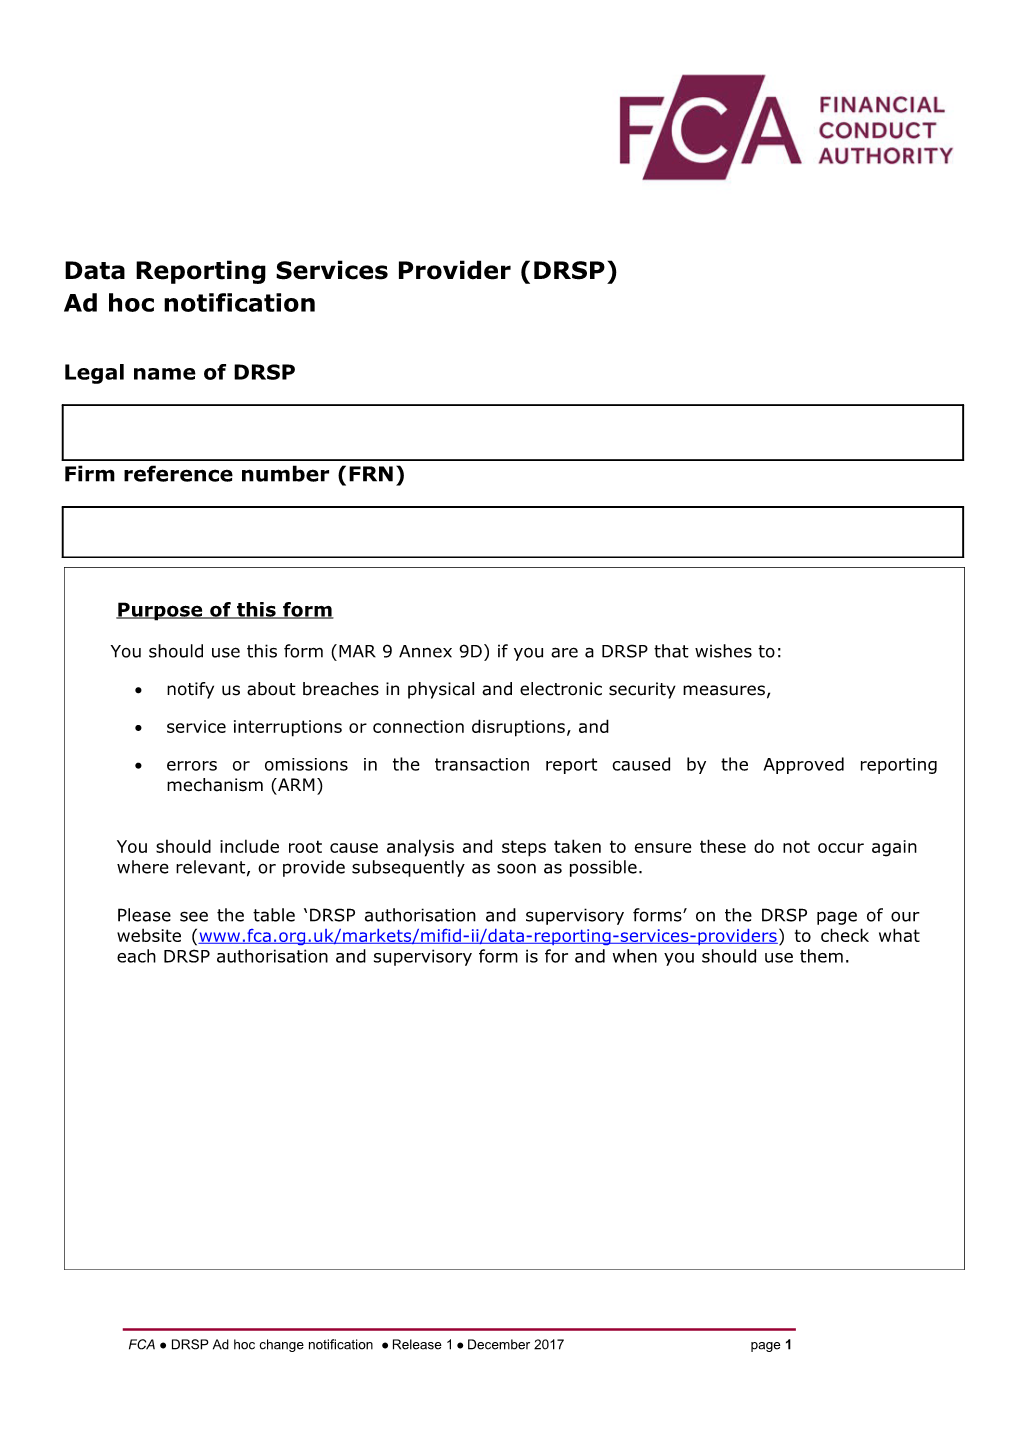 Data Reporting Services Provider (DRSP)